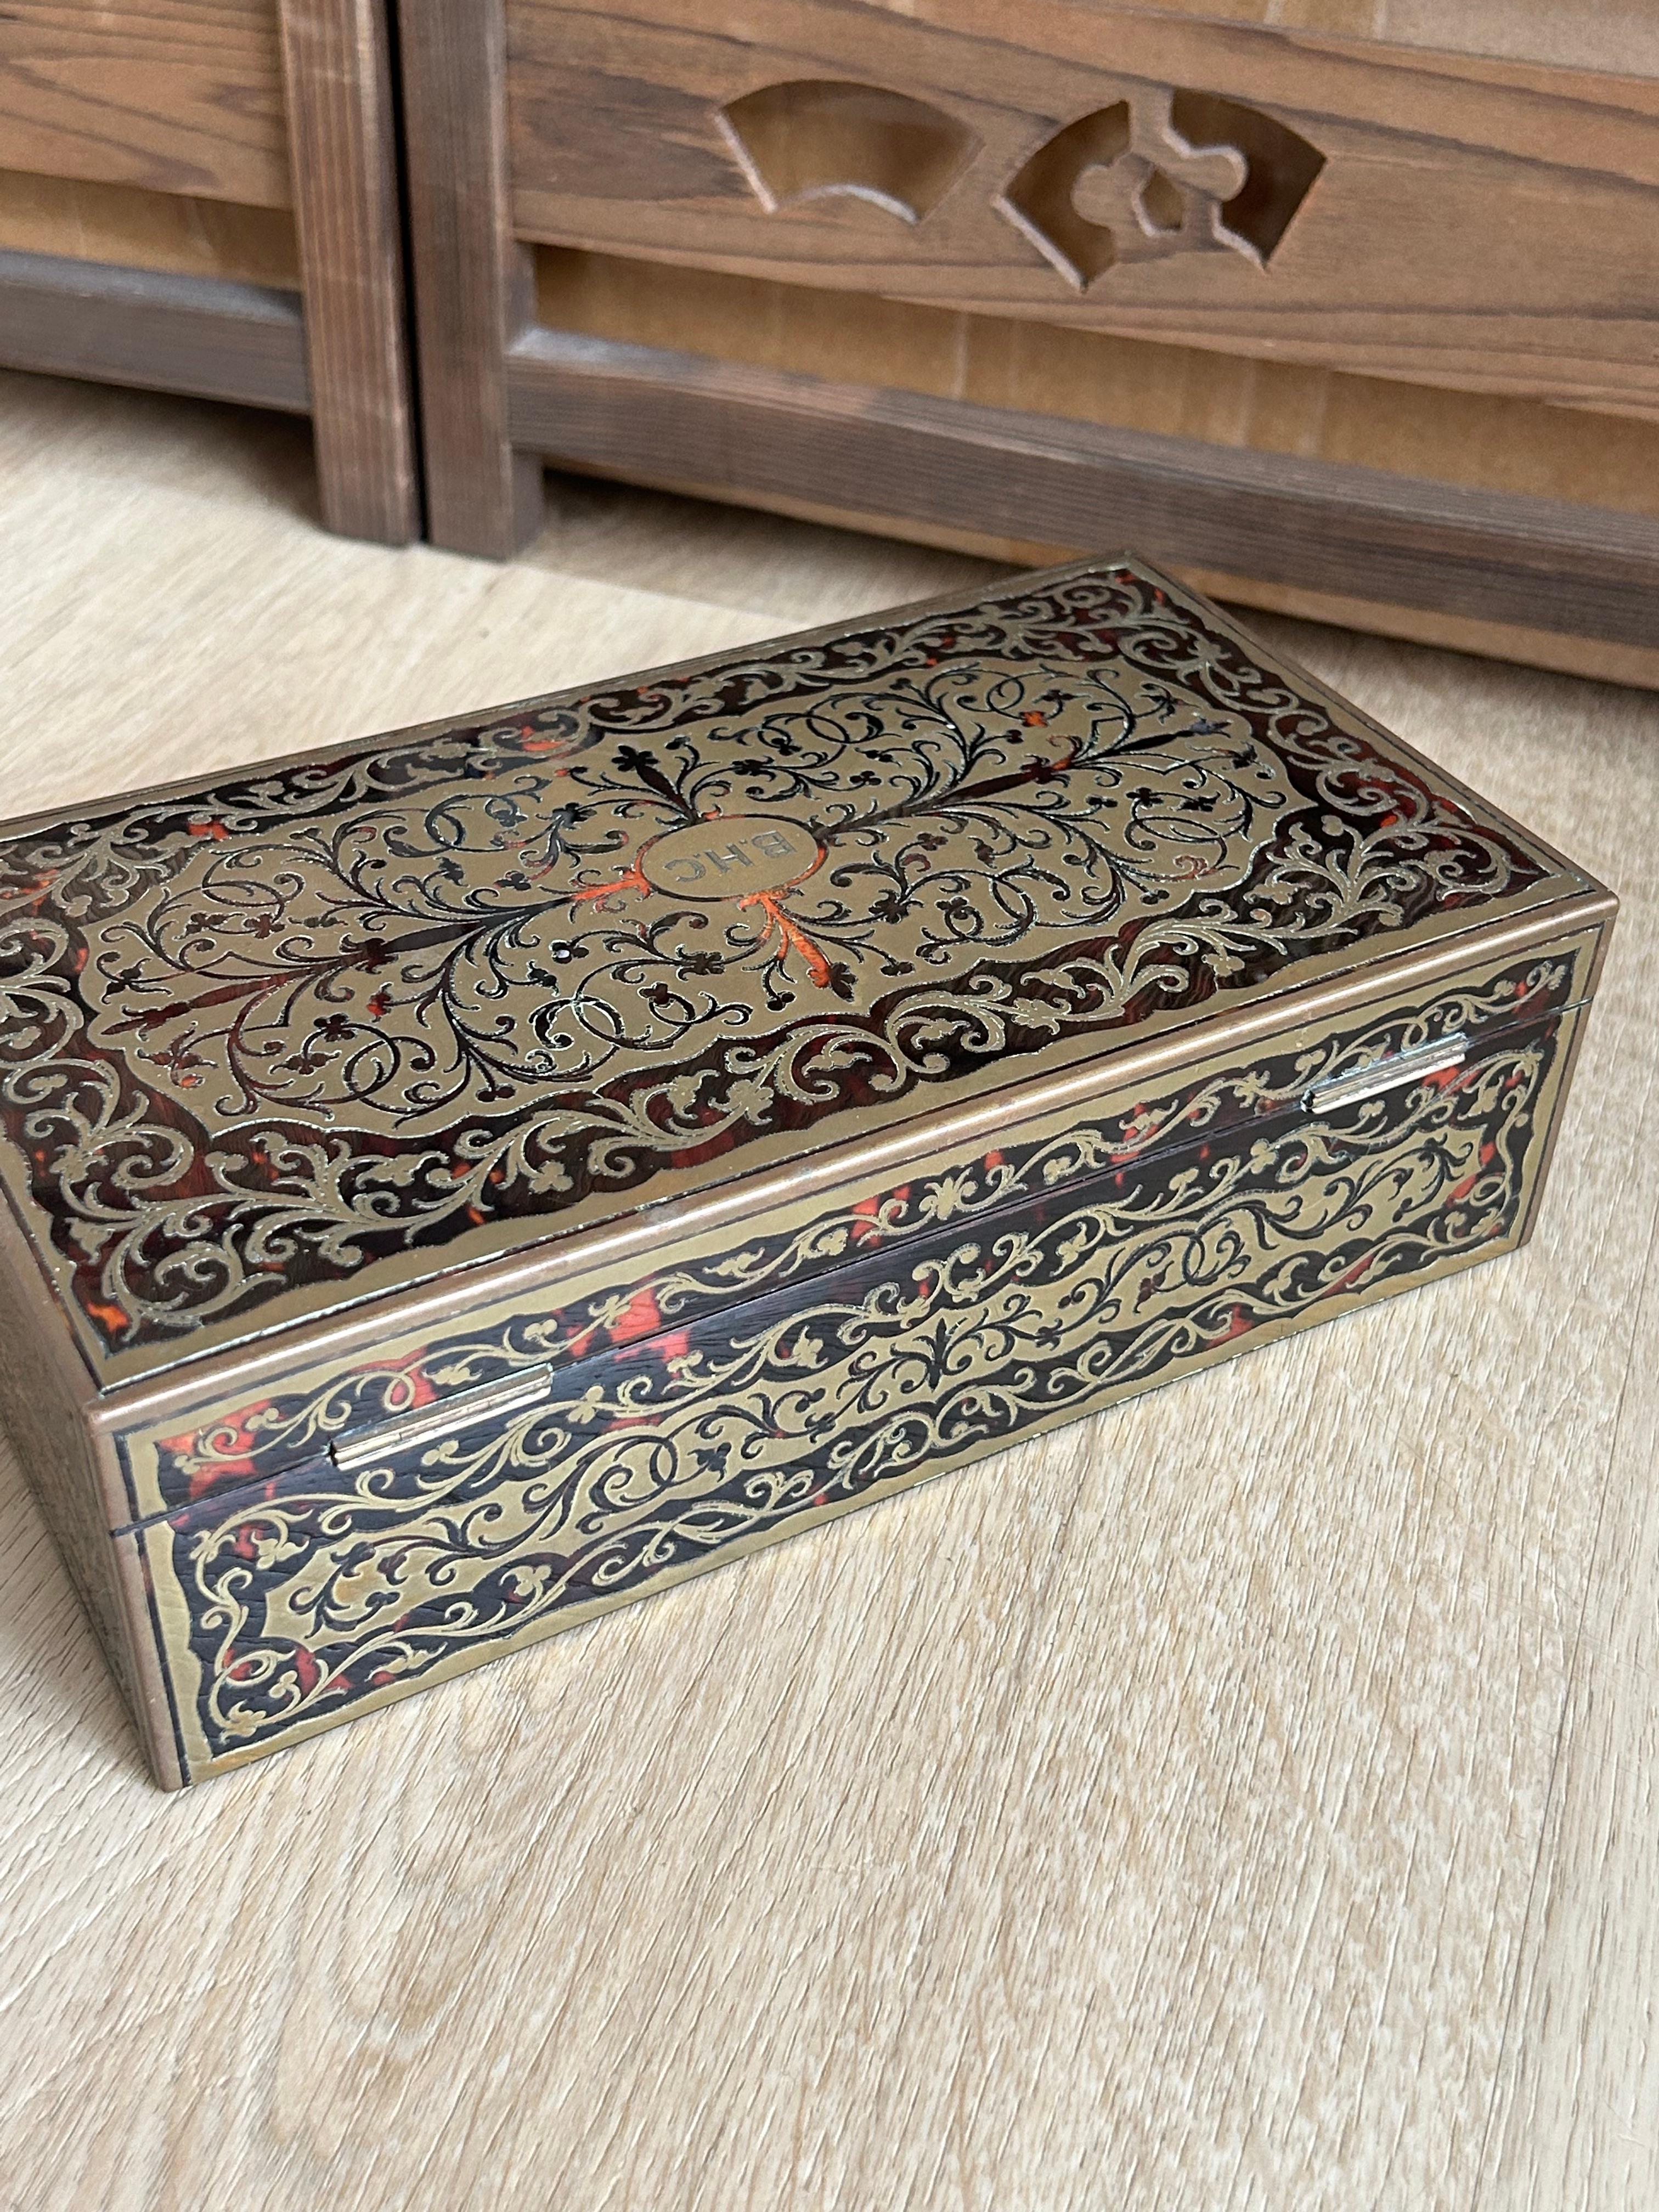 1924 Boulle Card box For Sale 1